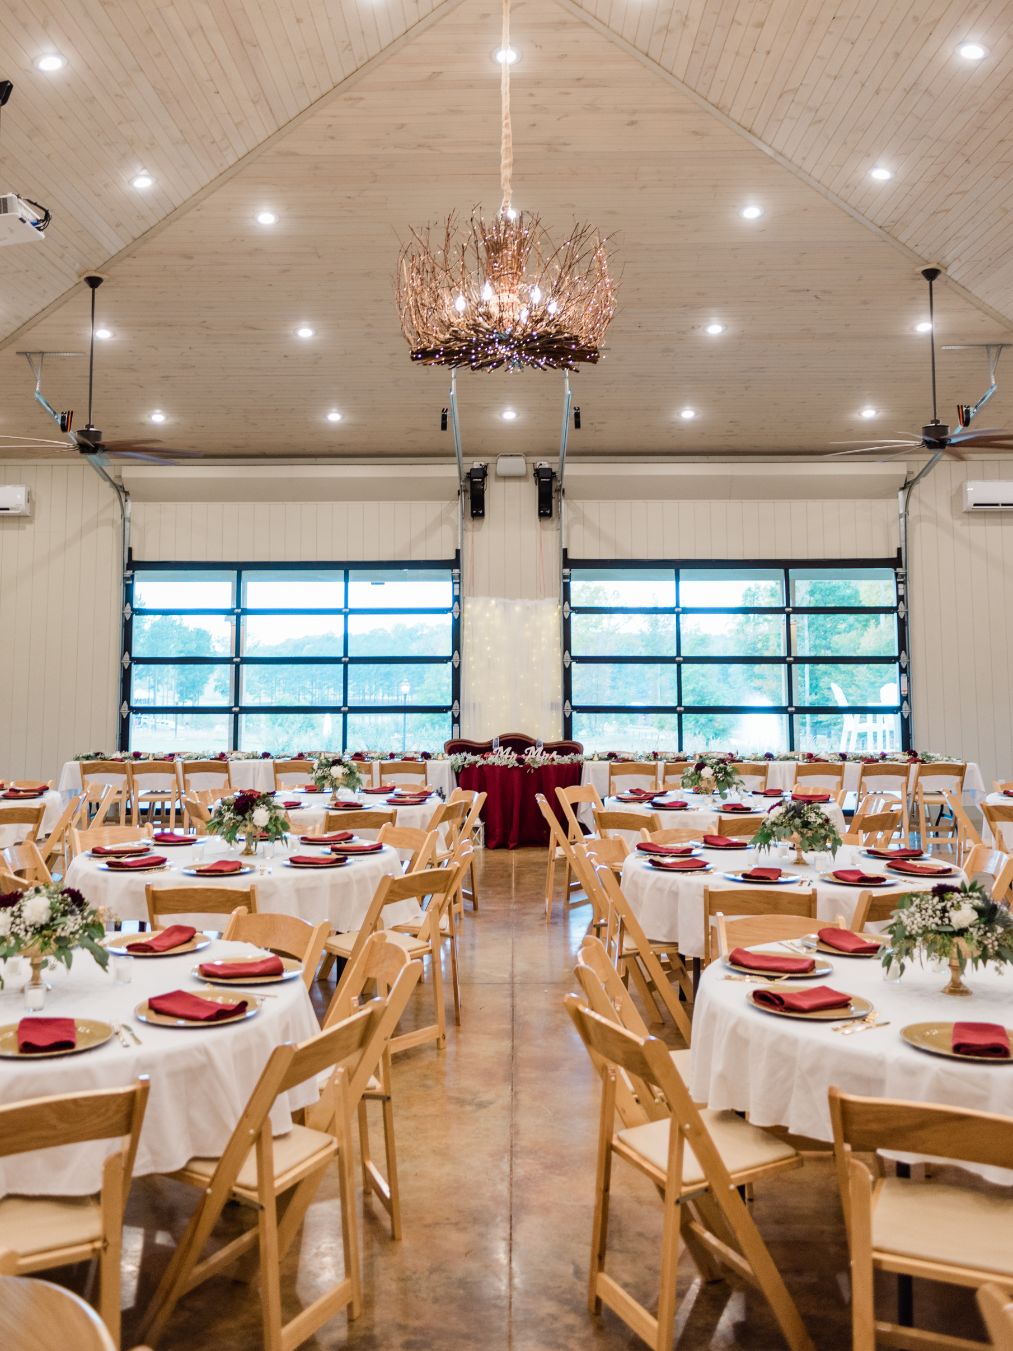 26 the pavilion sandy creek events center tennessee wedding venues